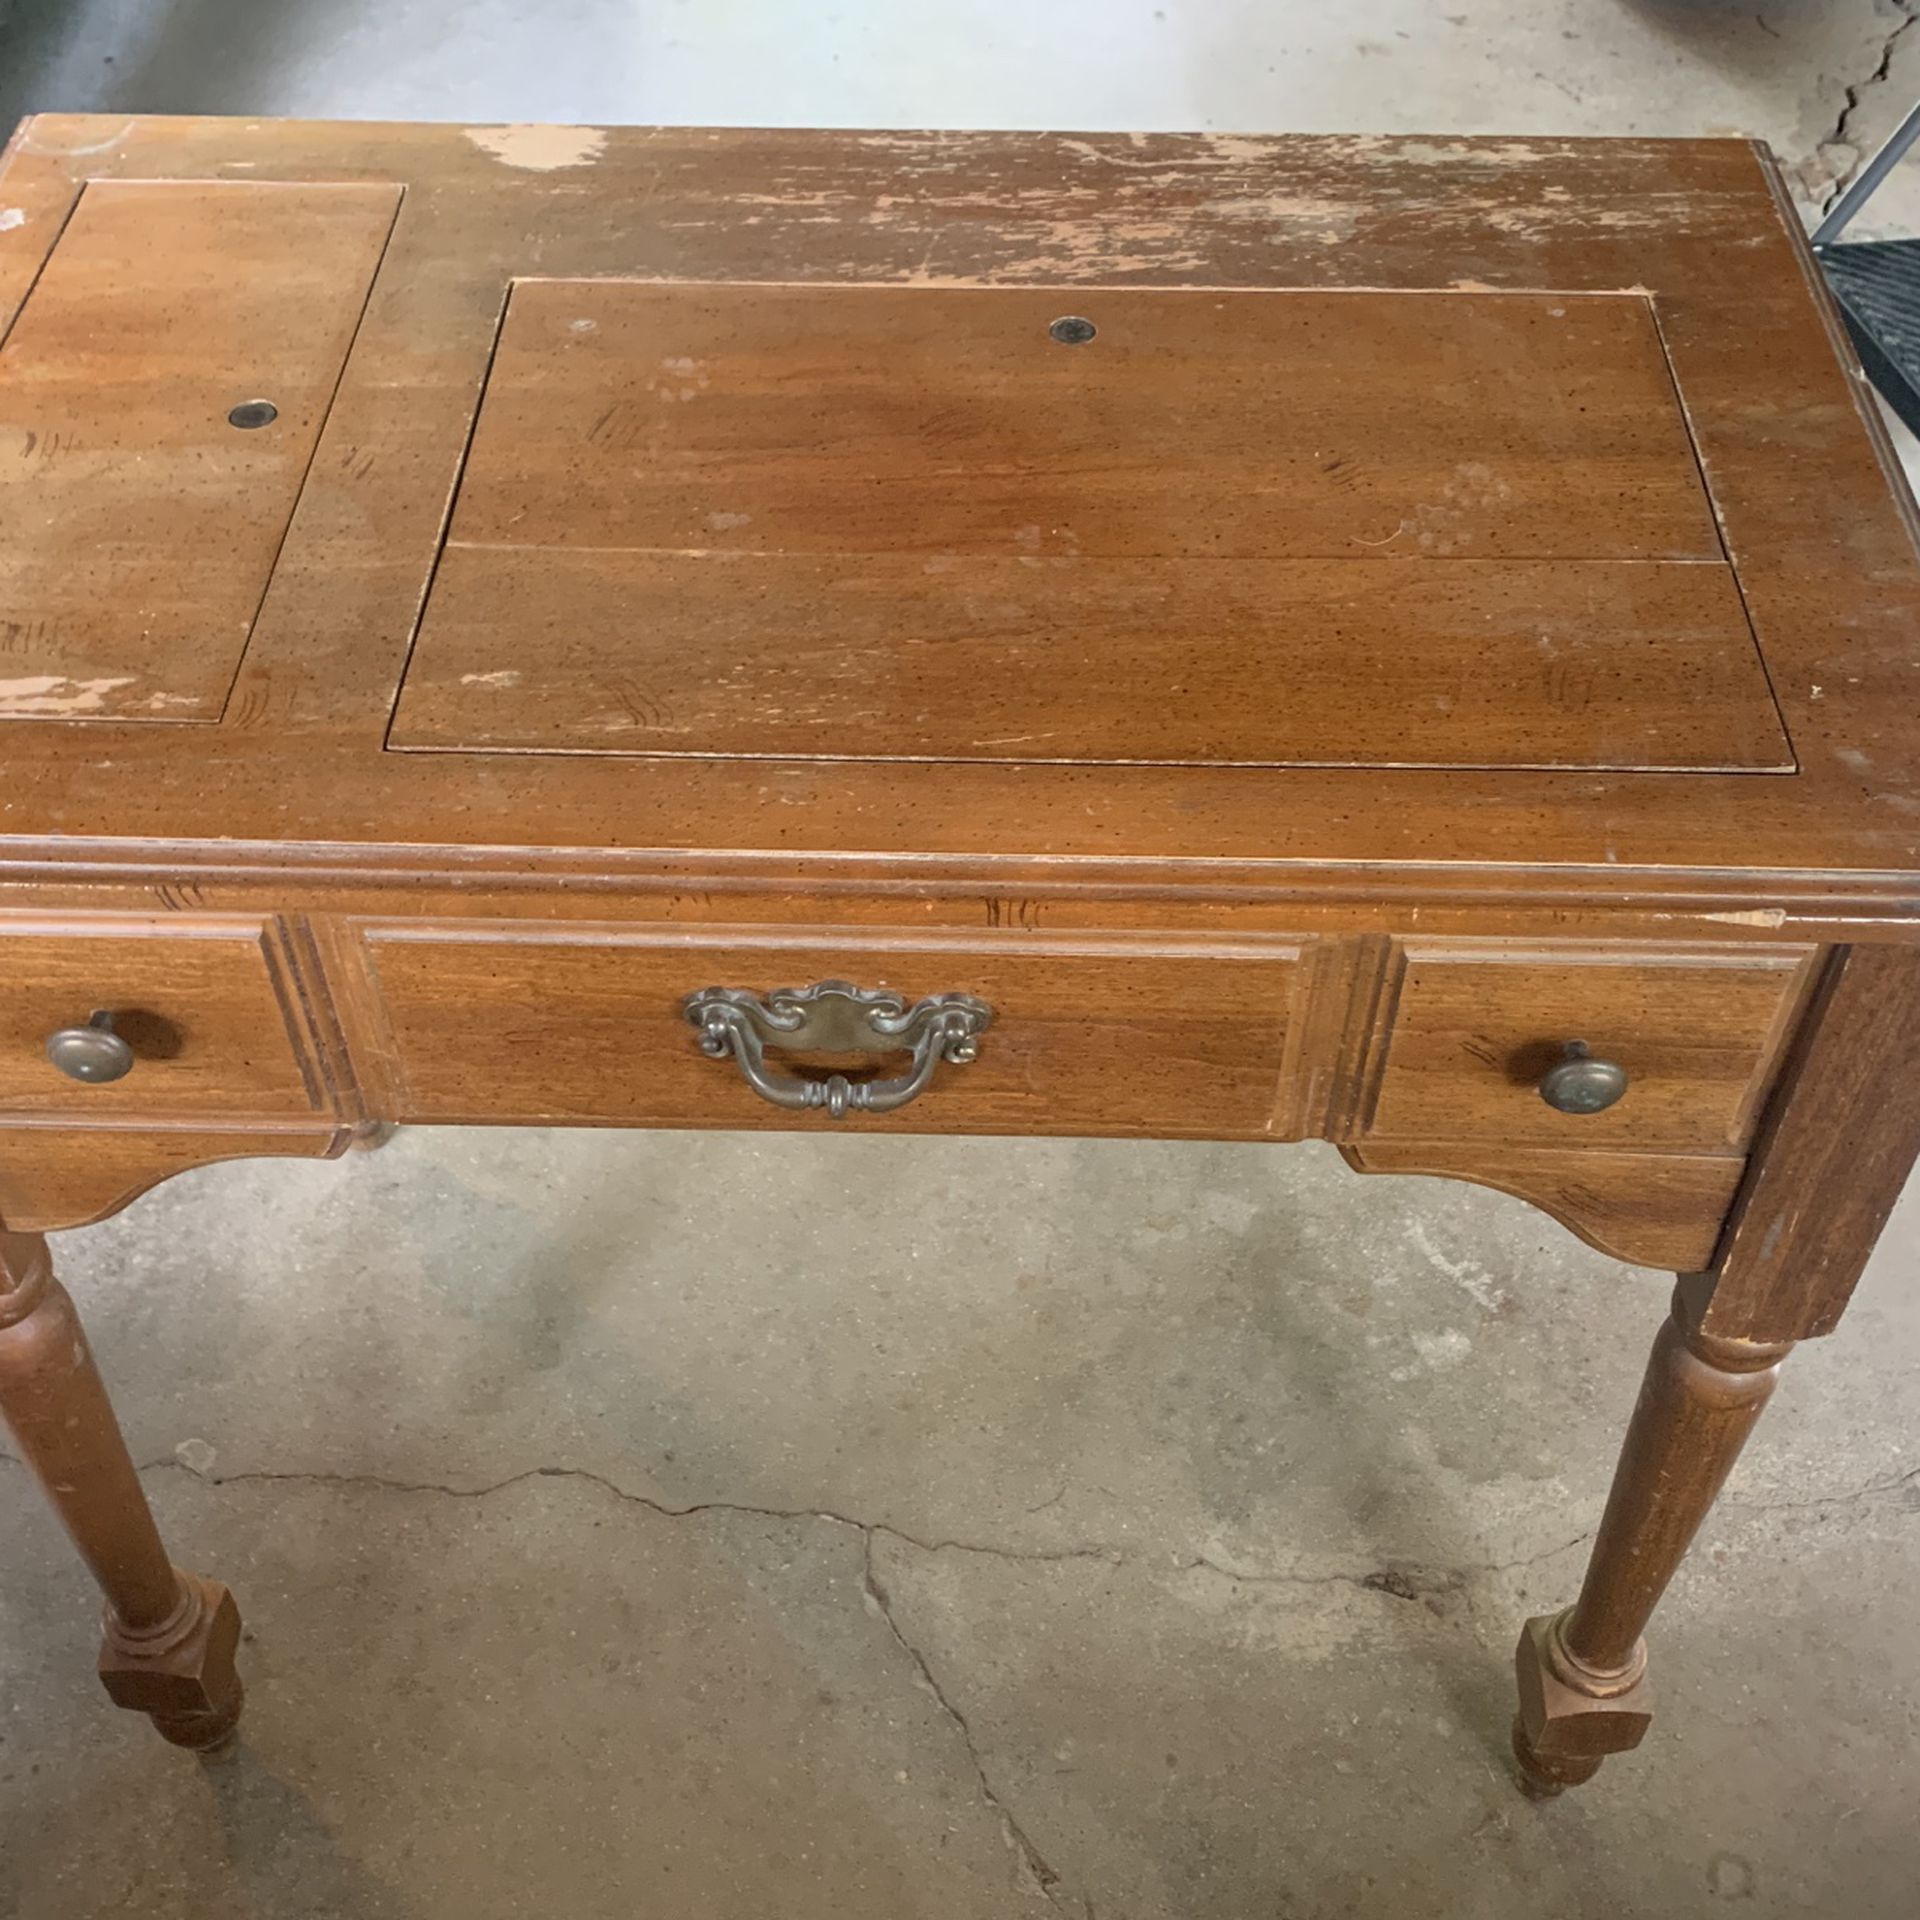 Free Sewing Machine Table